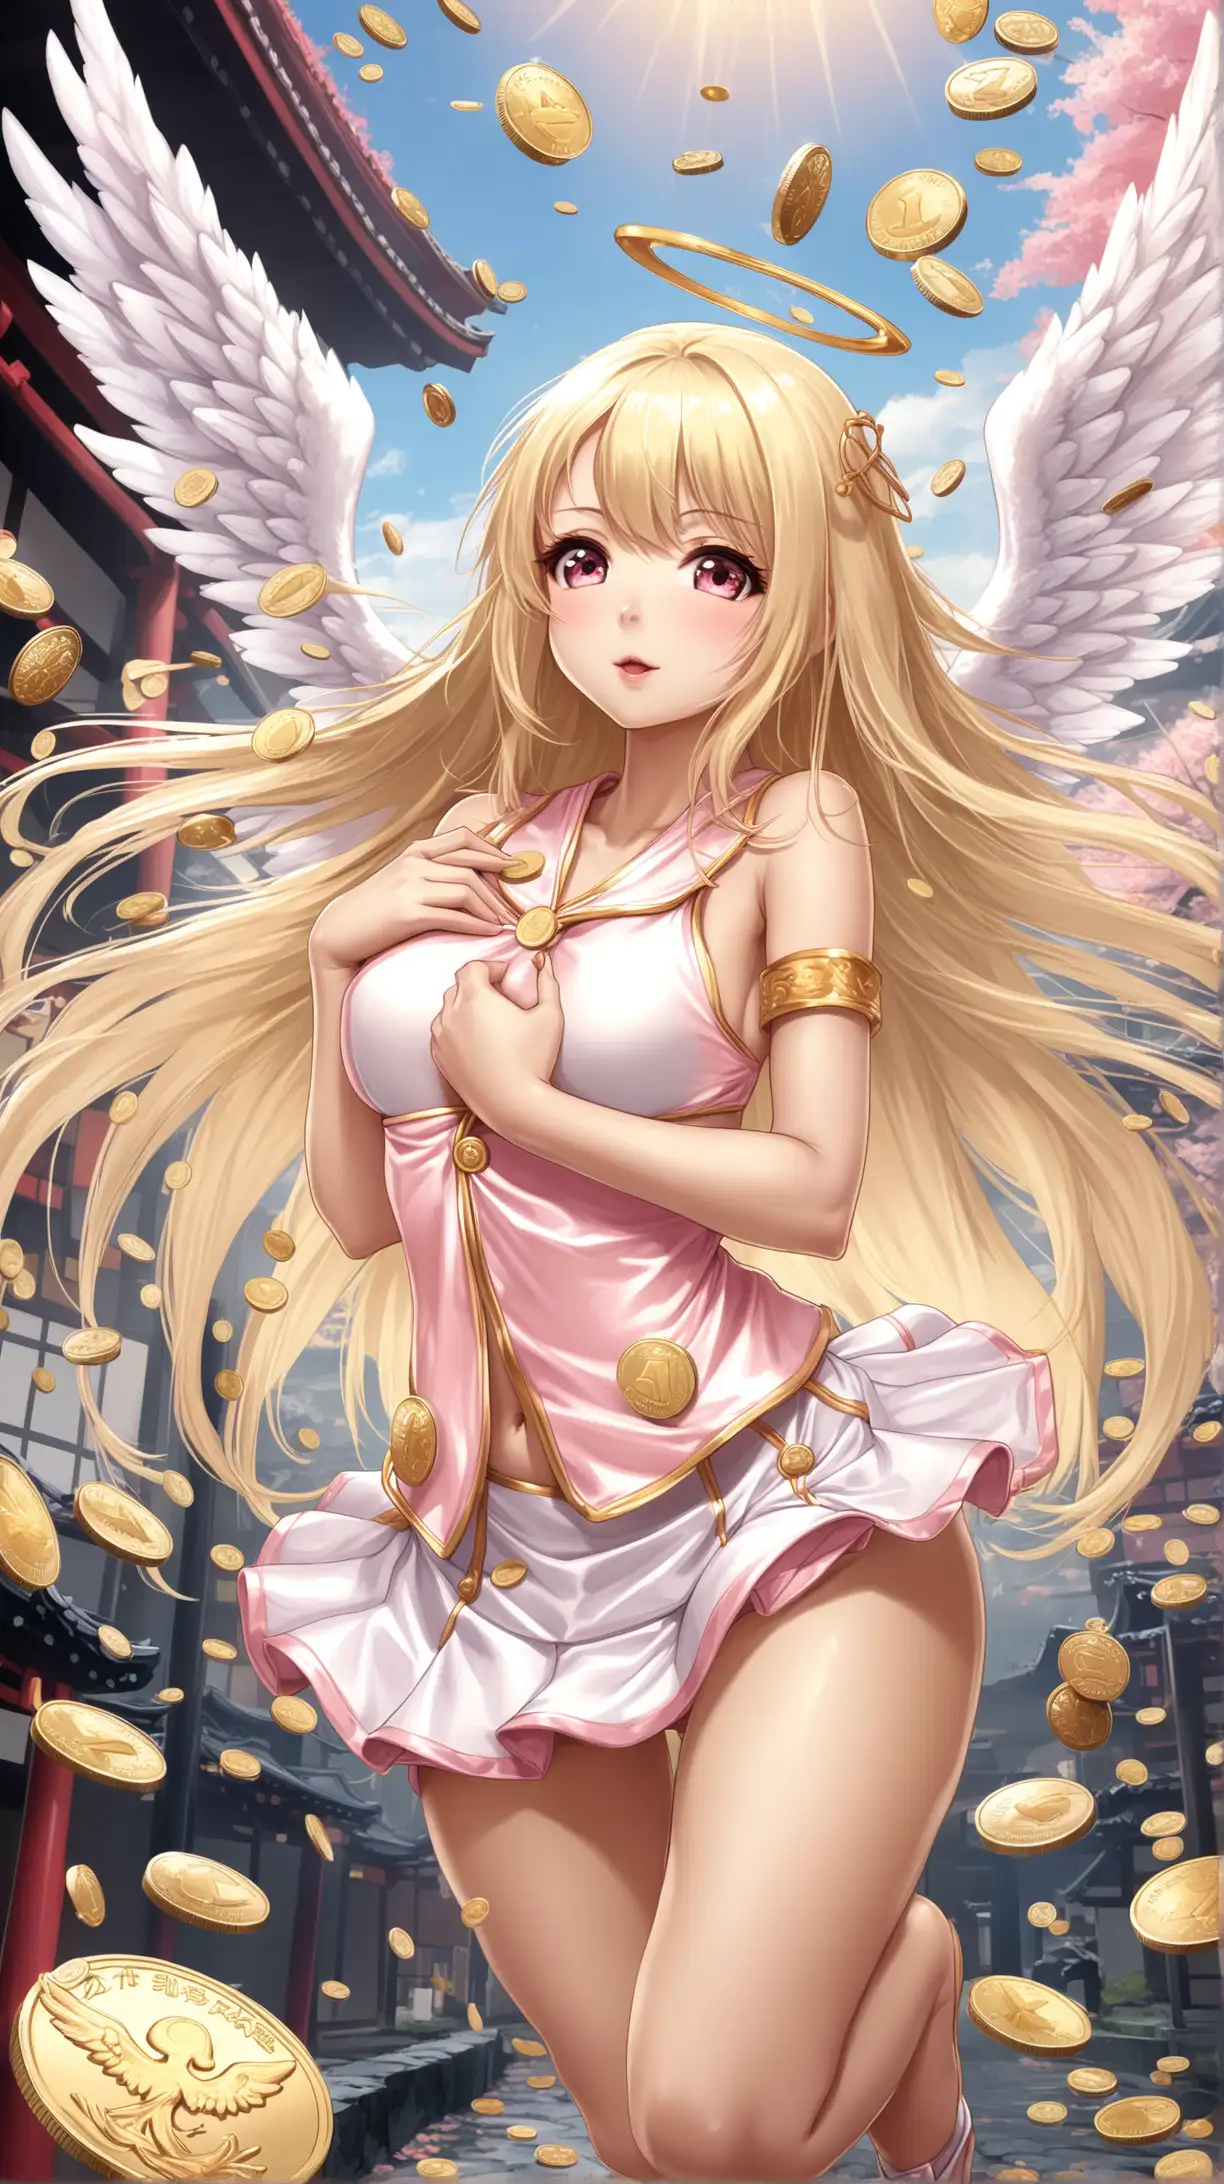 Playful Japanese Sexy Girl in Angel Costume with Blonde Hair and Coin